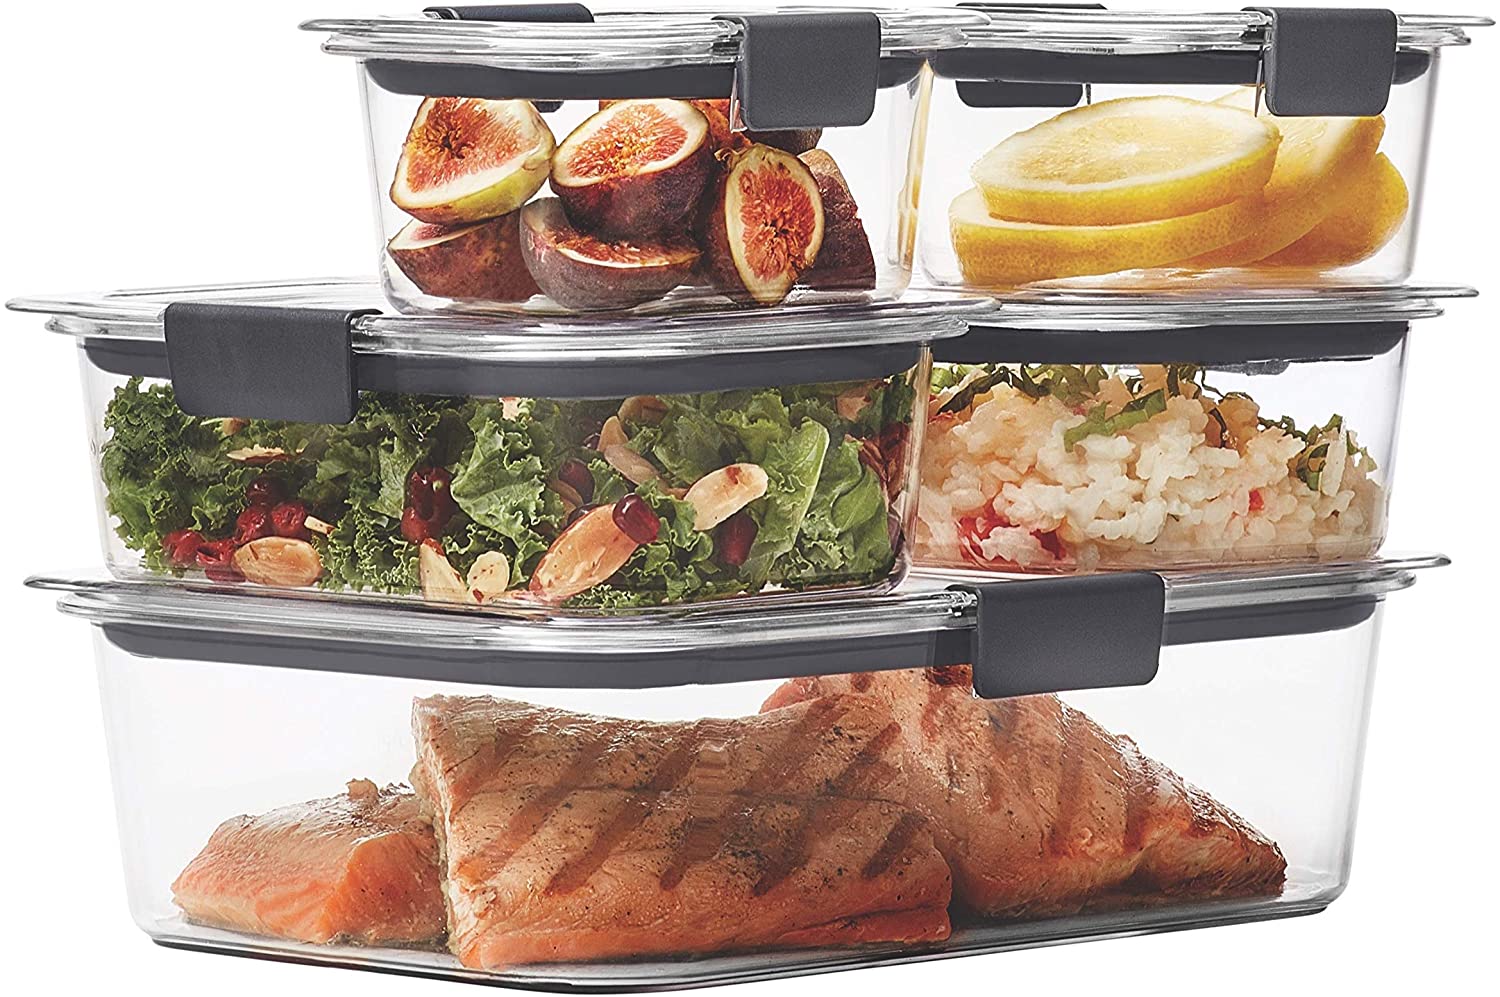 Rubbermaid Brilliance Food Storage Containers Price Drop at Amazon!